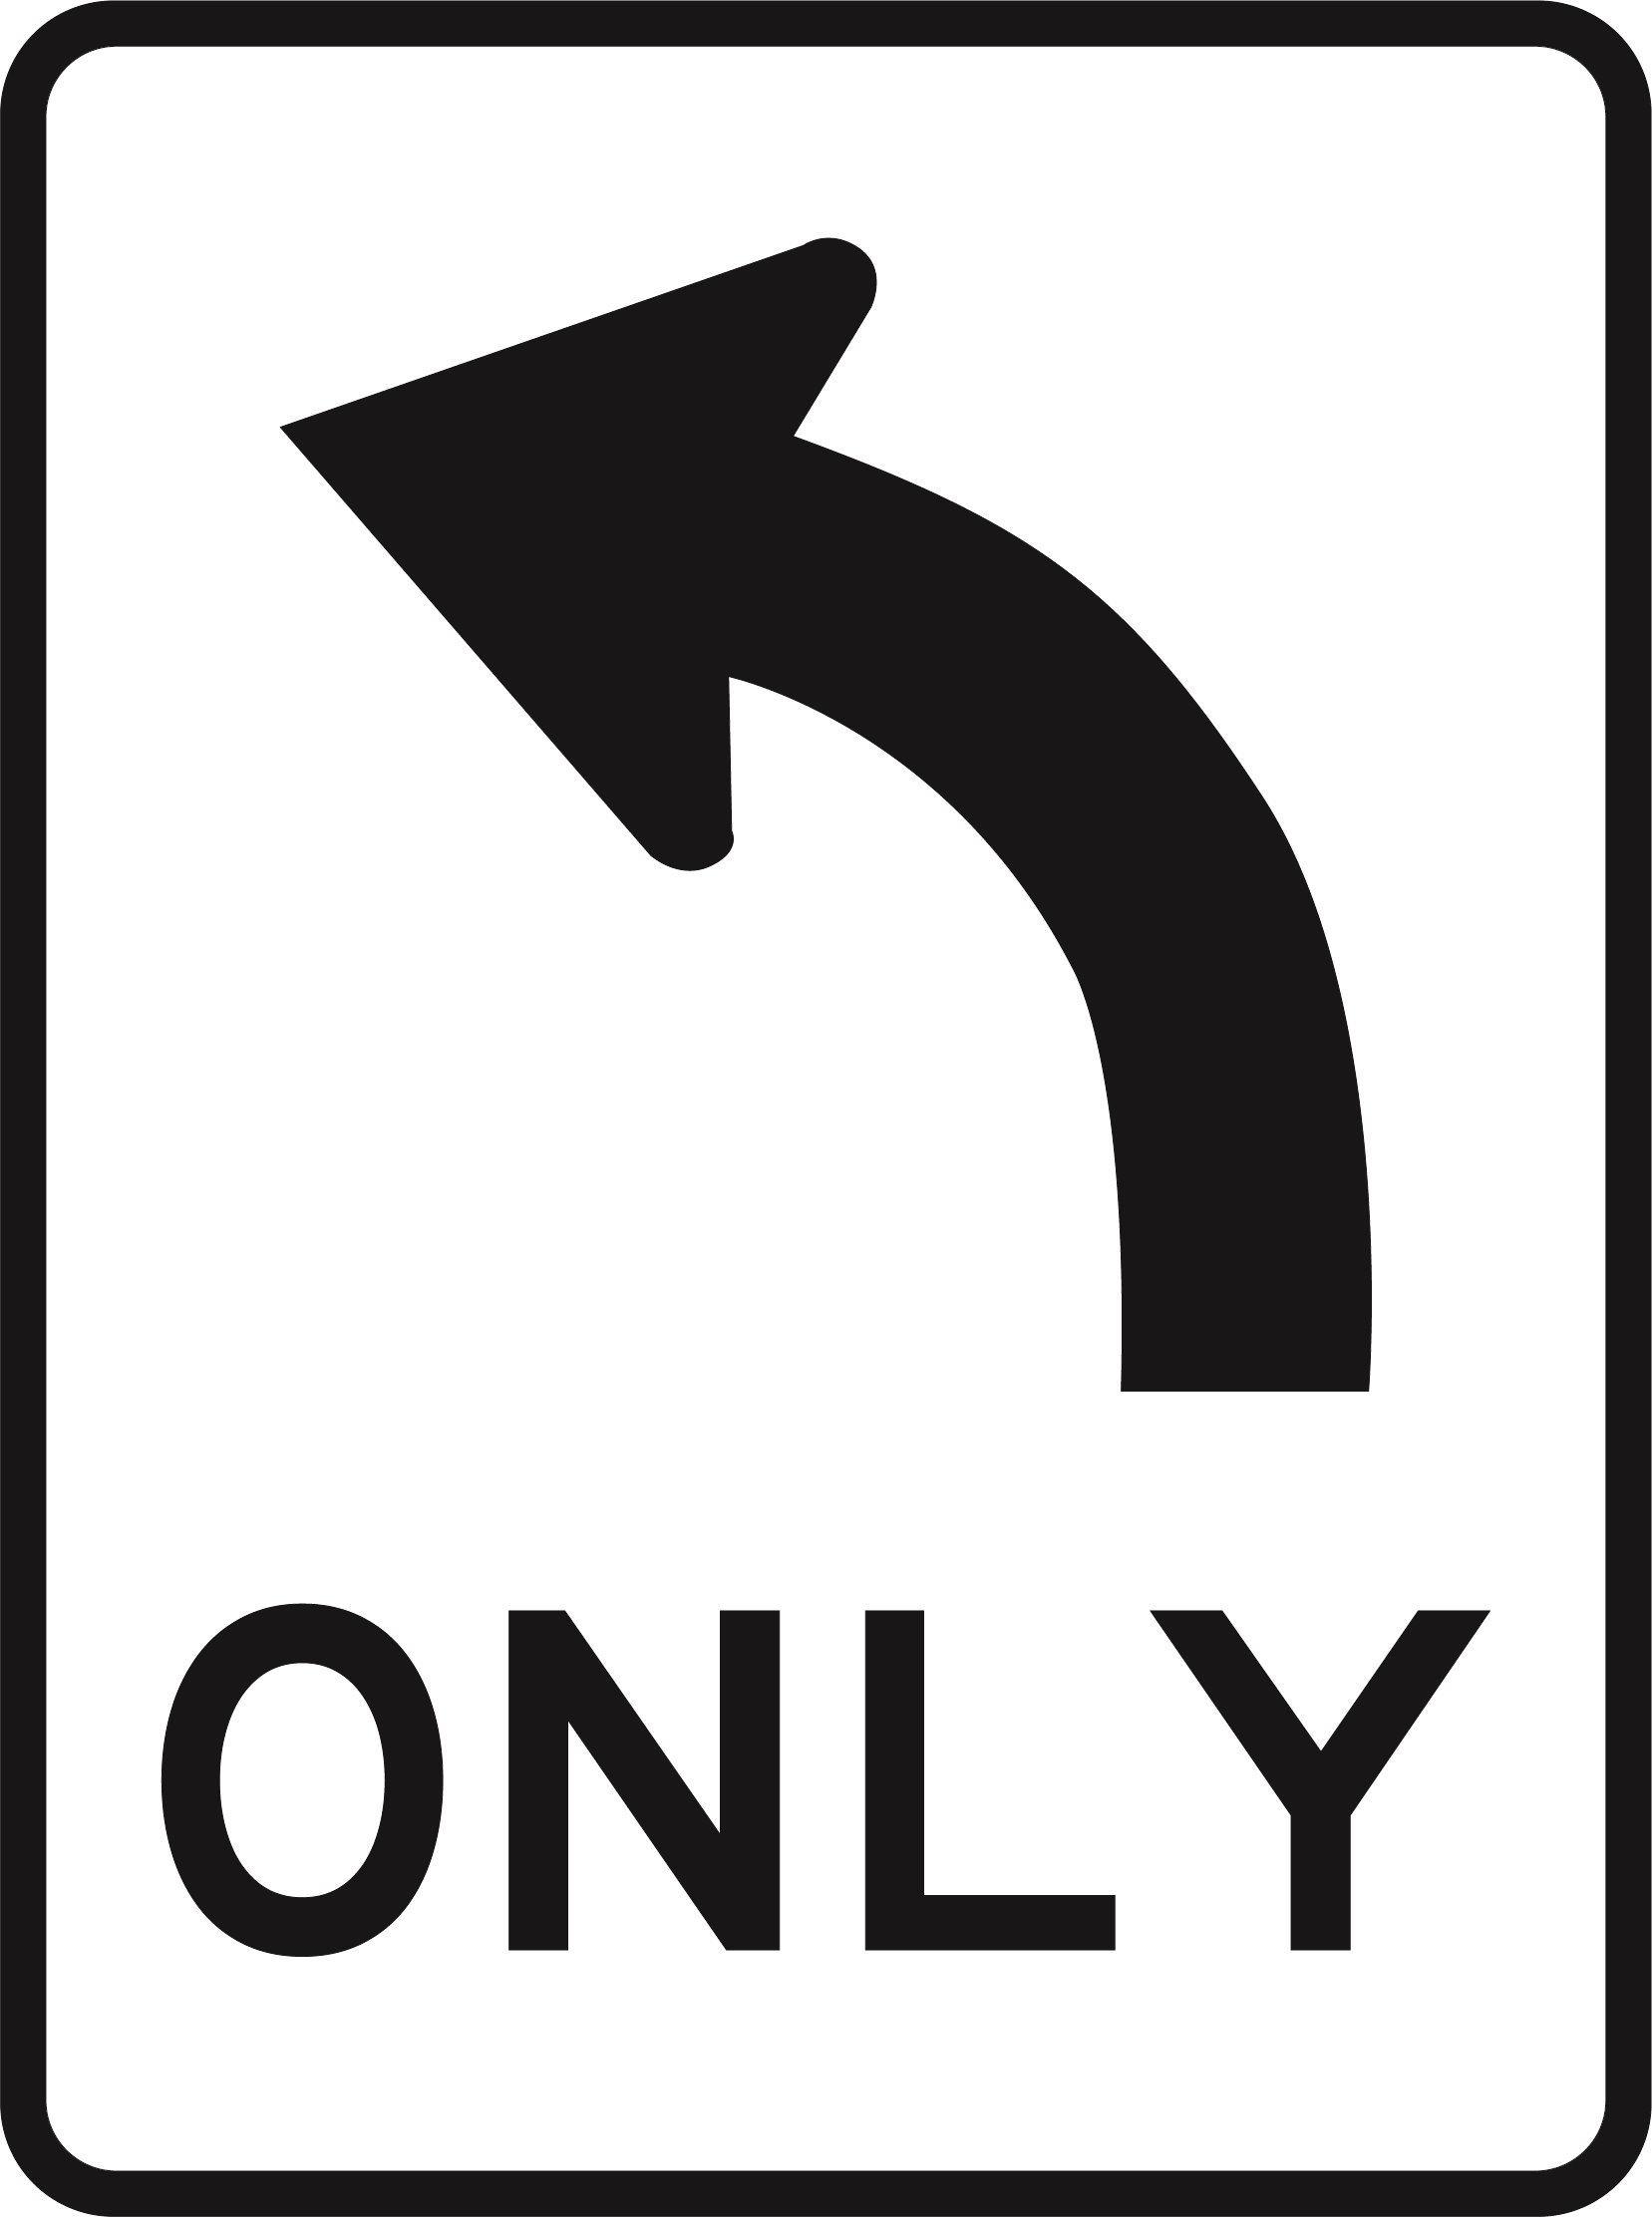 Only - Directional Sign